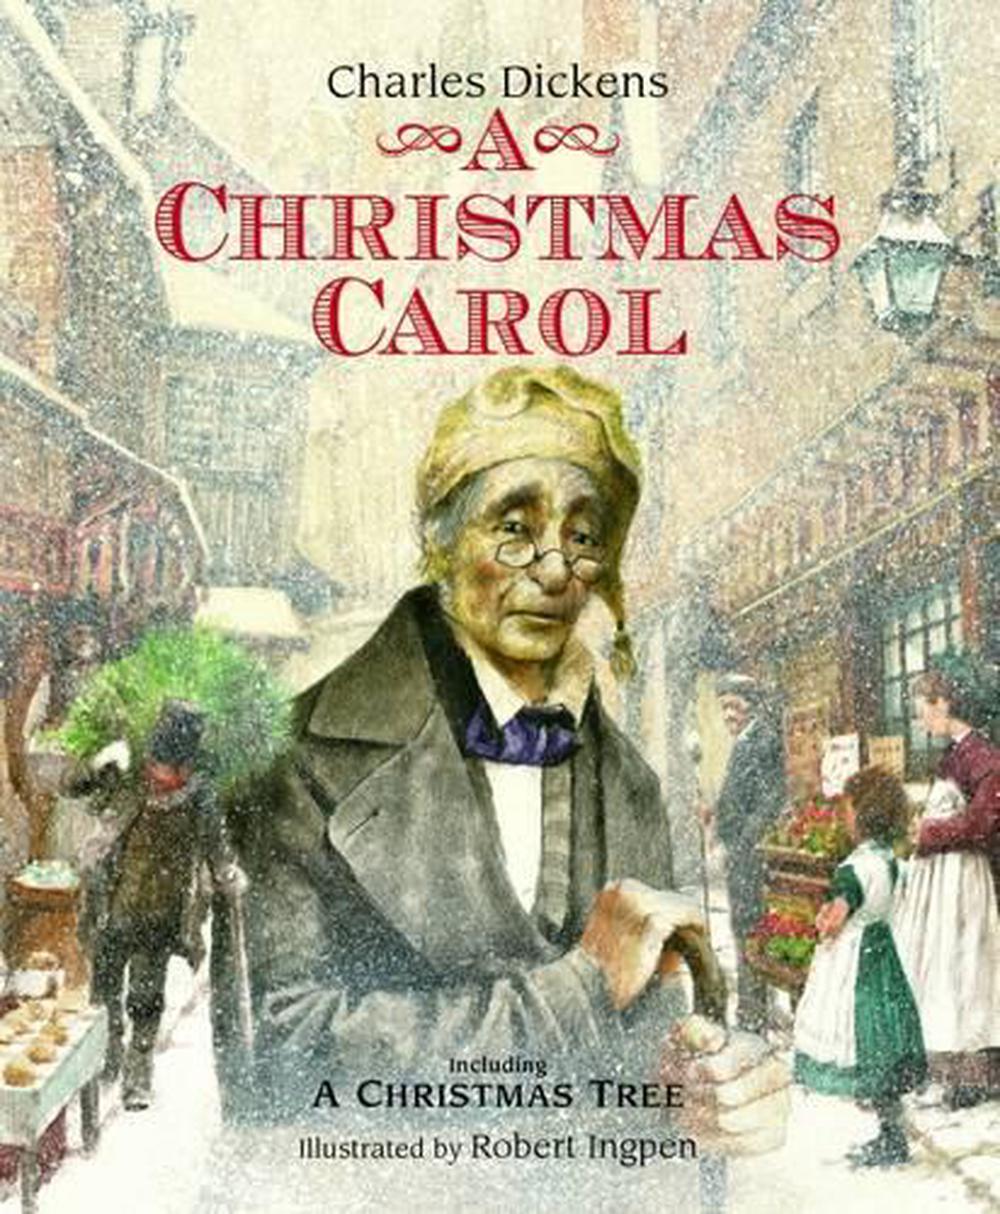 A Christmas Carol by Charles Dickens (English) Hardcover Book Free